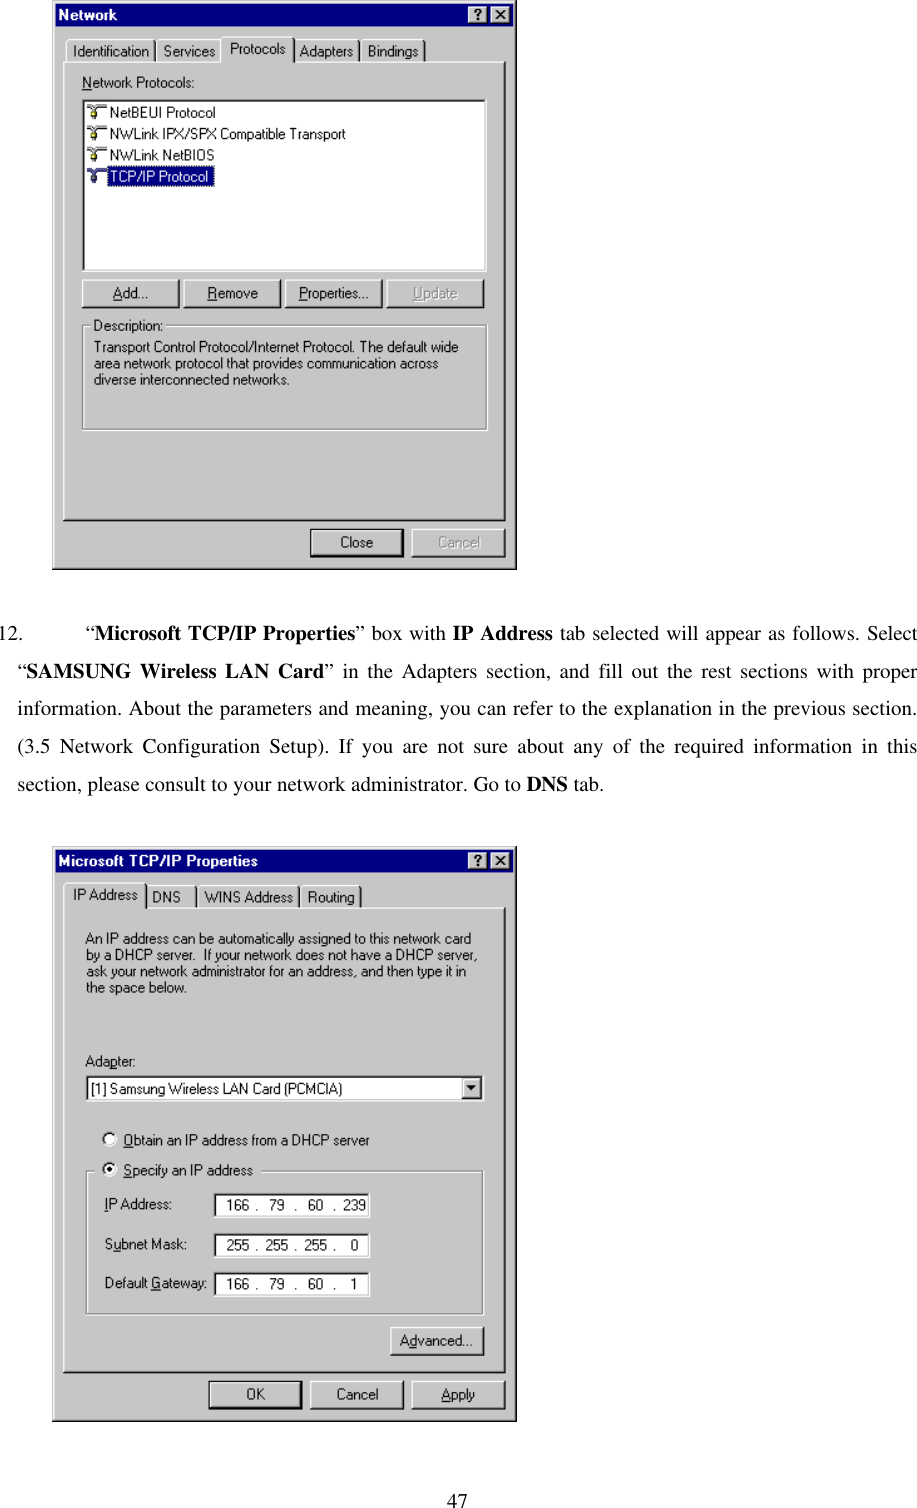 47          12. “Microsoft TCP/IP Properties” box with IP Address tab selected will appear as follows. Select“SAMSUNG Wireless LAN Card” in the Adapters section, and fill out the rest sections with properinformation. About the parameters and meaning, you can refer to the explanation in the previous section.(3.5 Network Configuration Setup). If you are not sure about any of the required information in thissection, please consult to your network administrator. Go to DNS tab.          